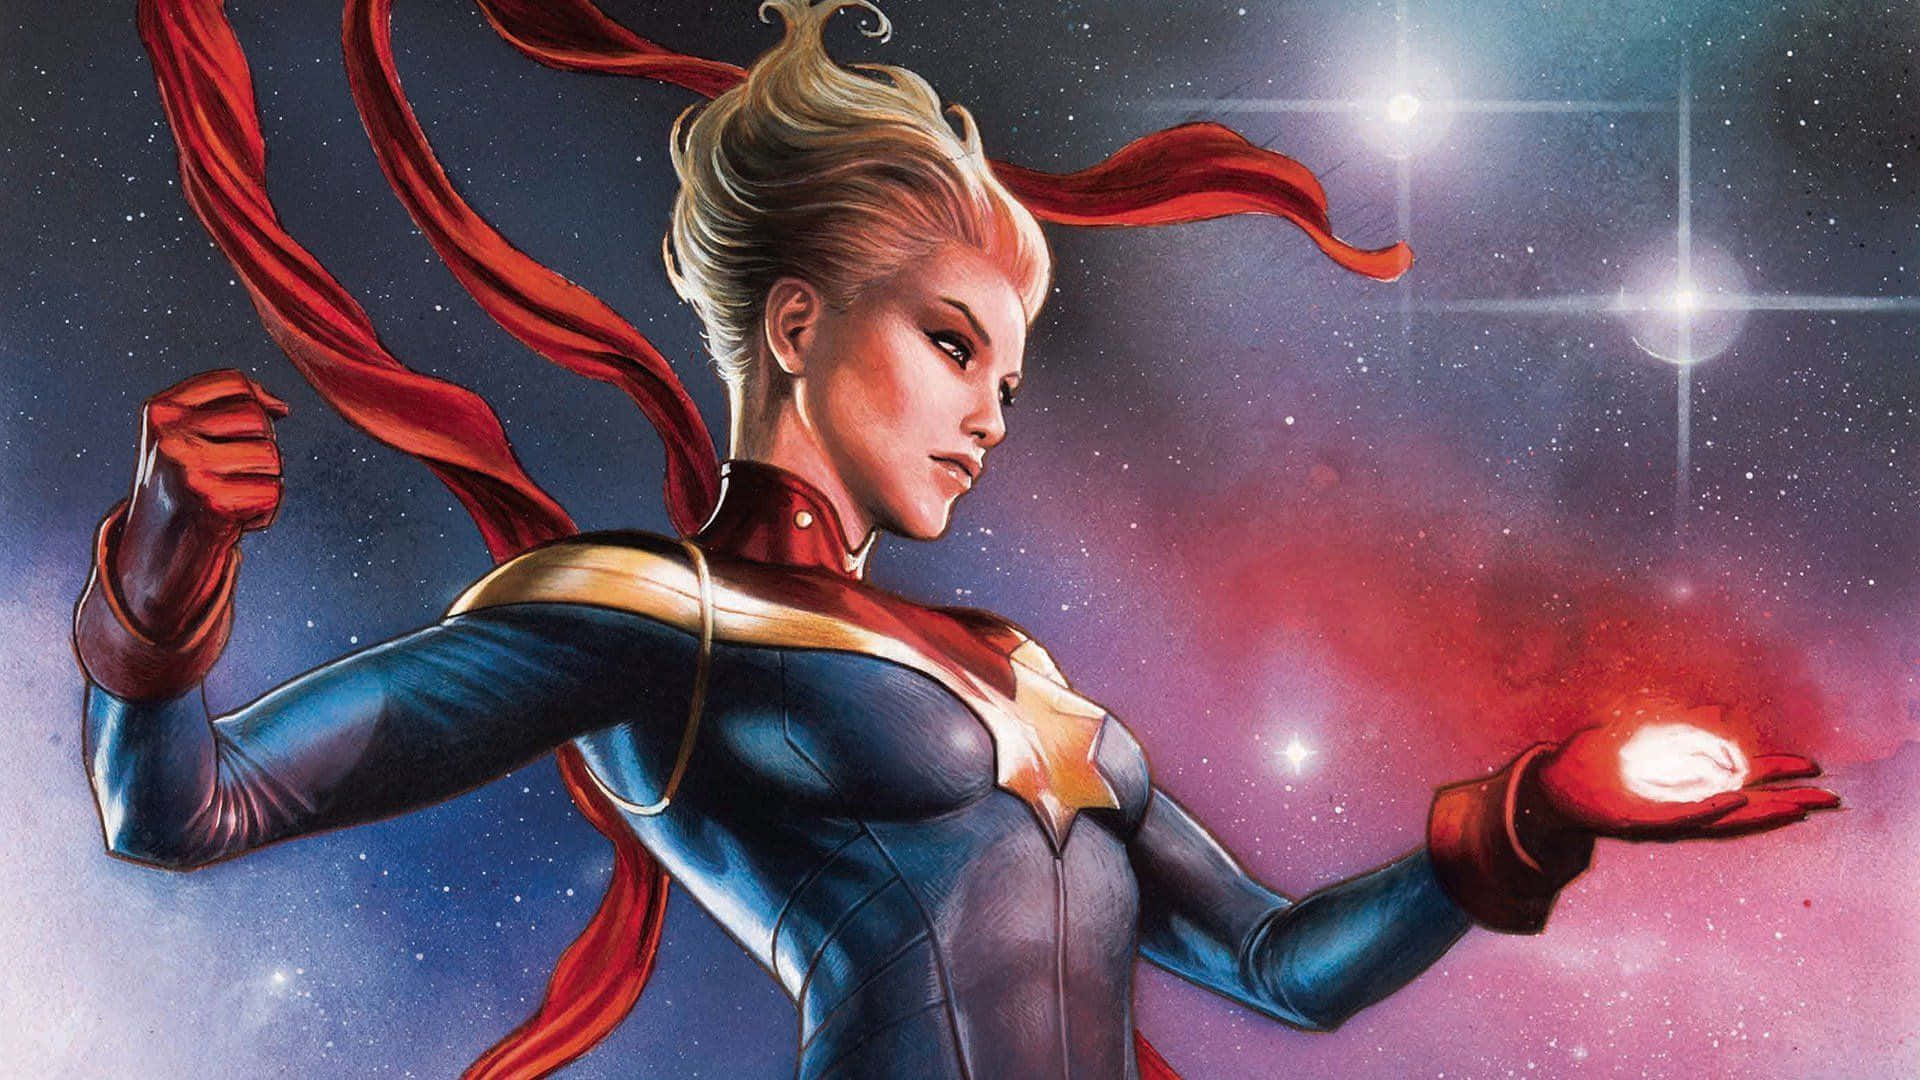 Fly high with Captain Marvel!